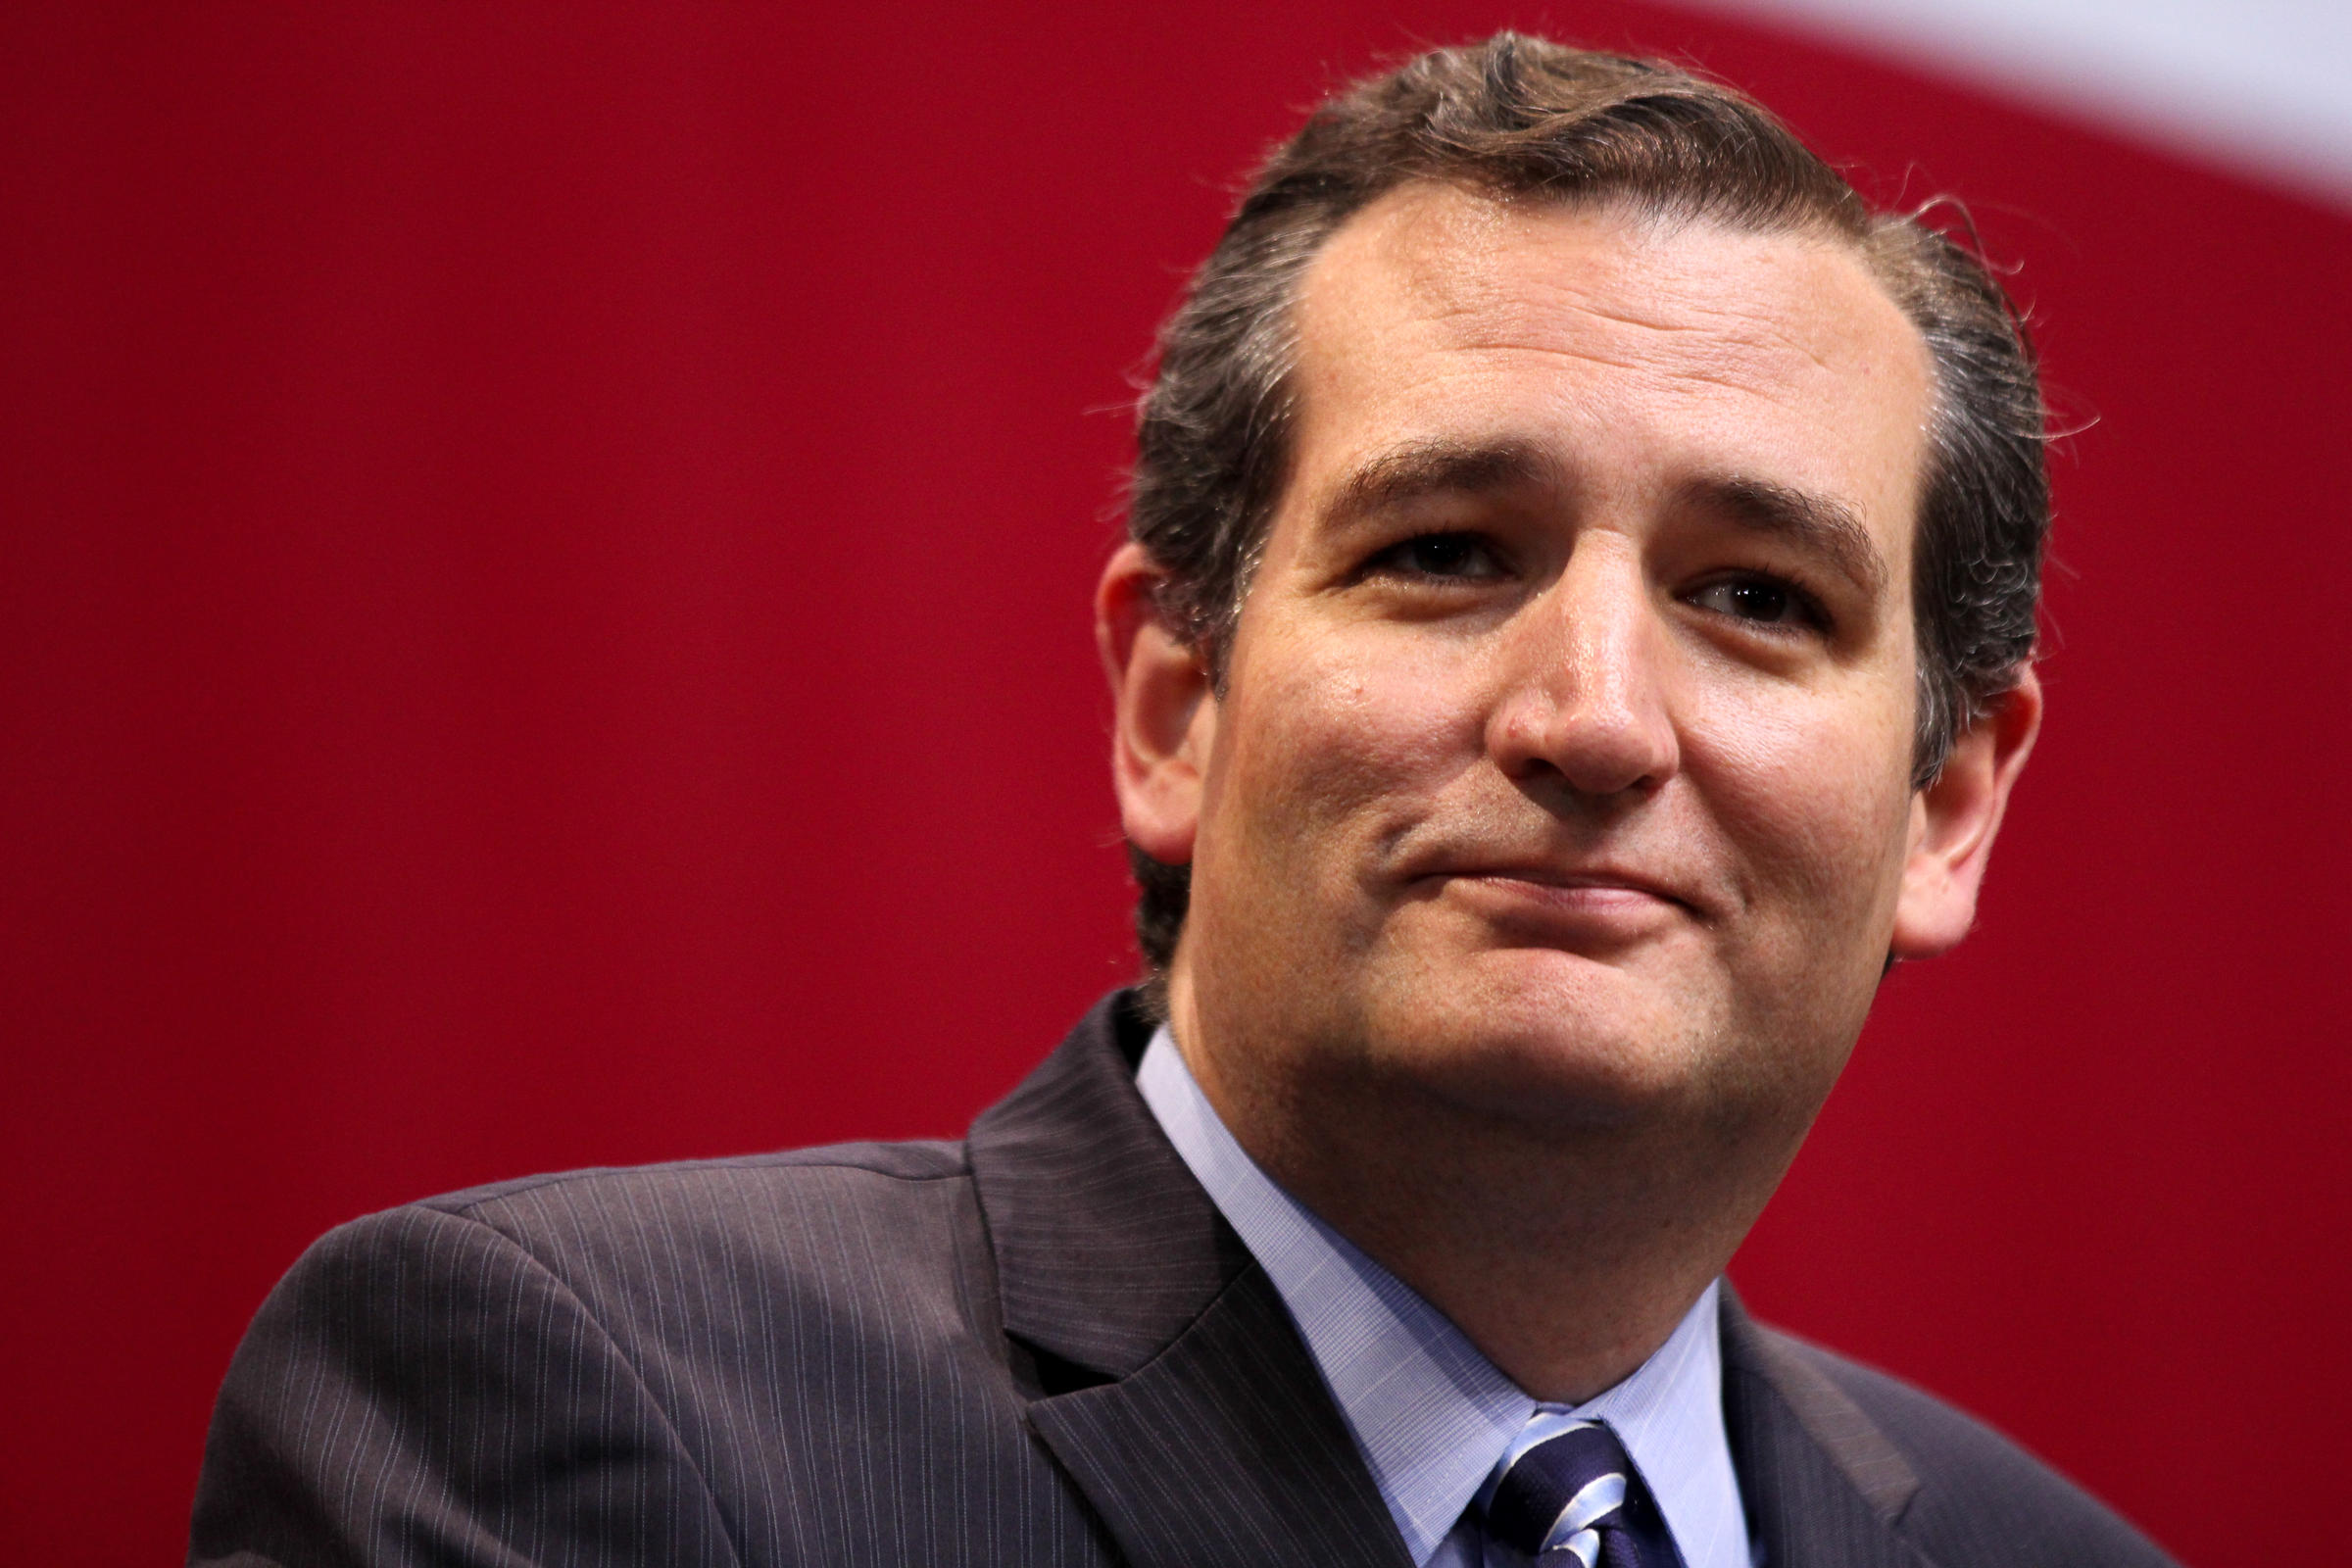 If possible, please join me in welcoming Senator Ted Cruz to Wichita Falls this Wednesday, April 4th, for a campaign event. He will be at The Kitchen (1000 Burnett St.) at 3pm […]